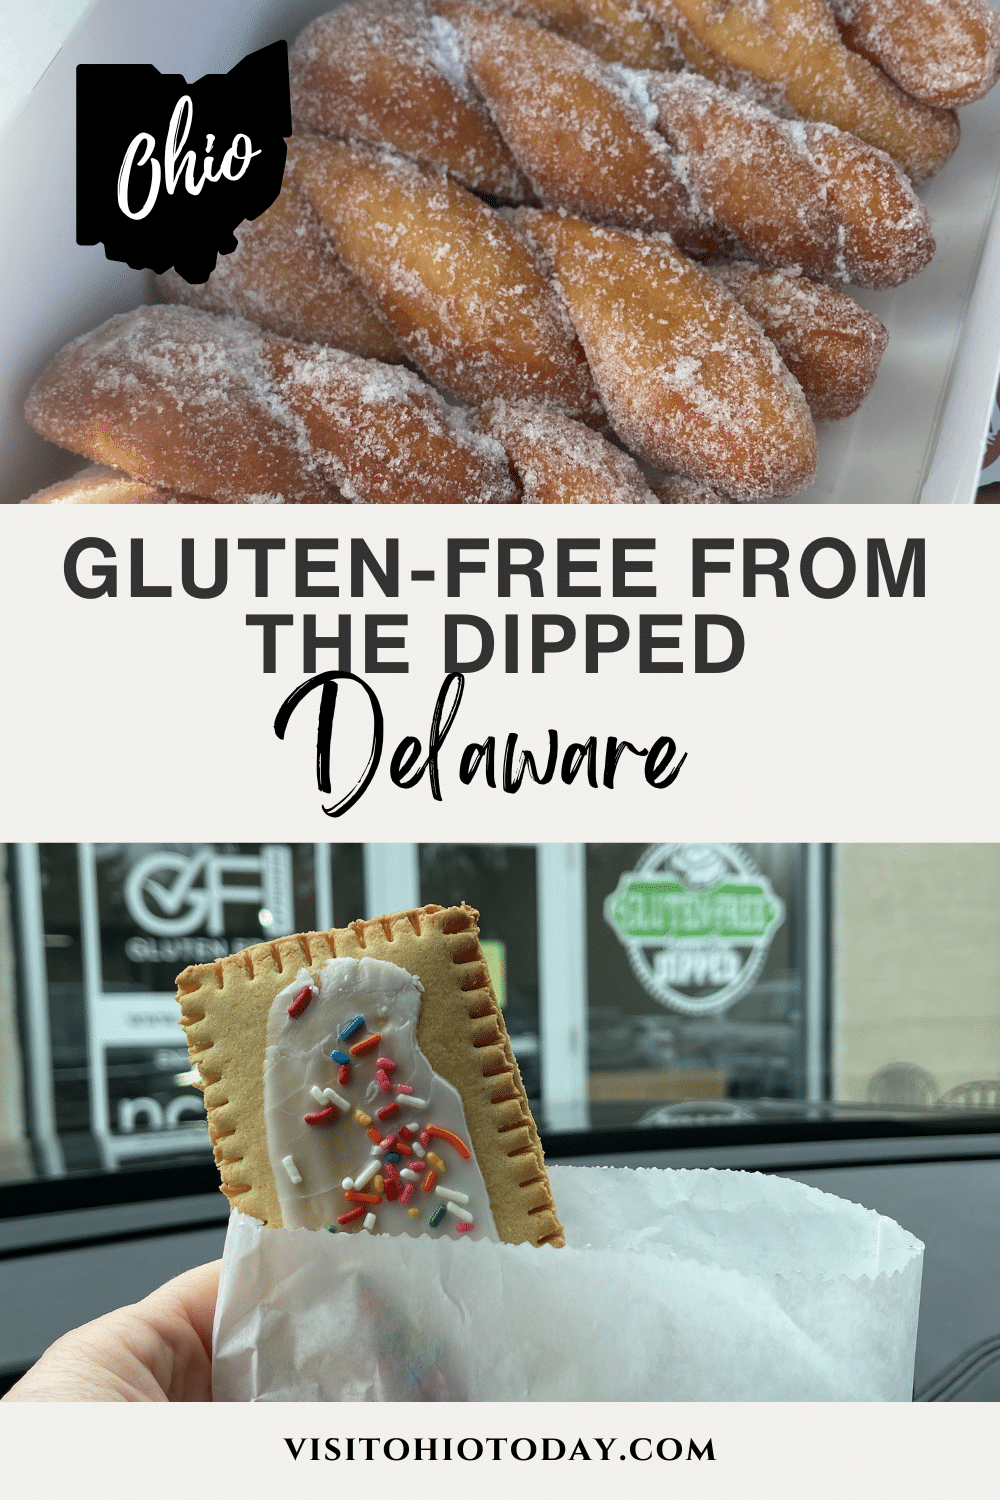 Gluten-Free from The Dipped is a family run, gluten-free donut bakery in Delaware, Ohio. All ingredients are carefully researched to ensure everything is truly gluten-free, and they keep their facility meticulously clean to further prevent cross contamination. They also offer a large range of frozen hard-to-find GF products for sale here.